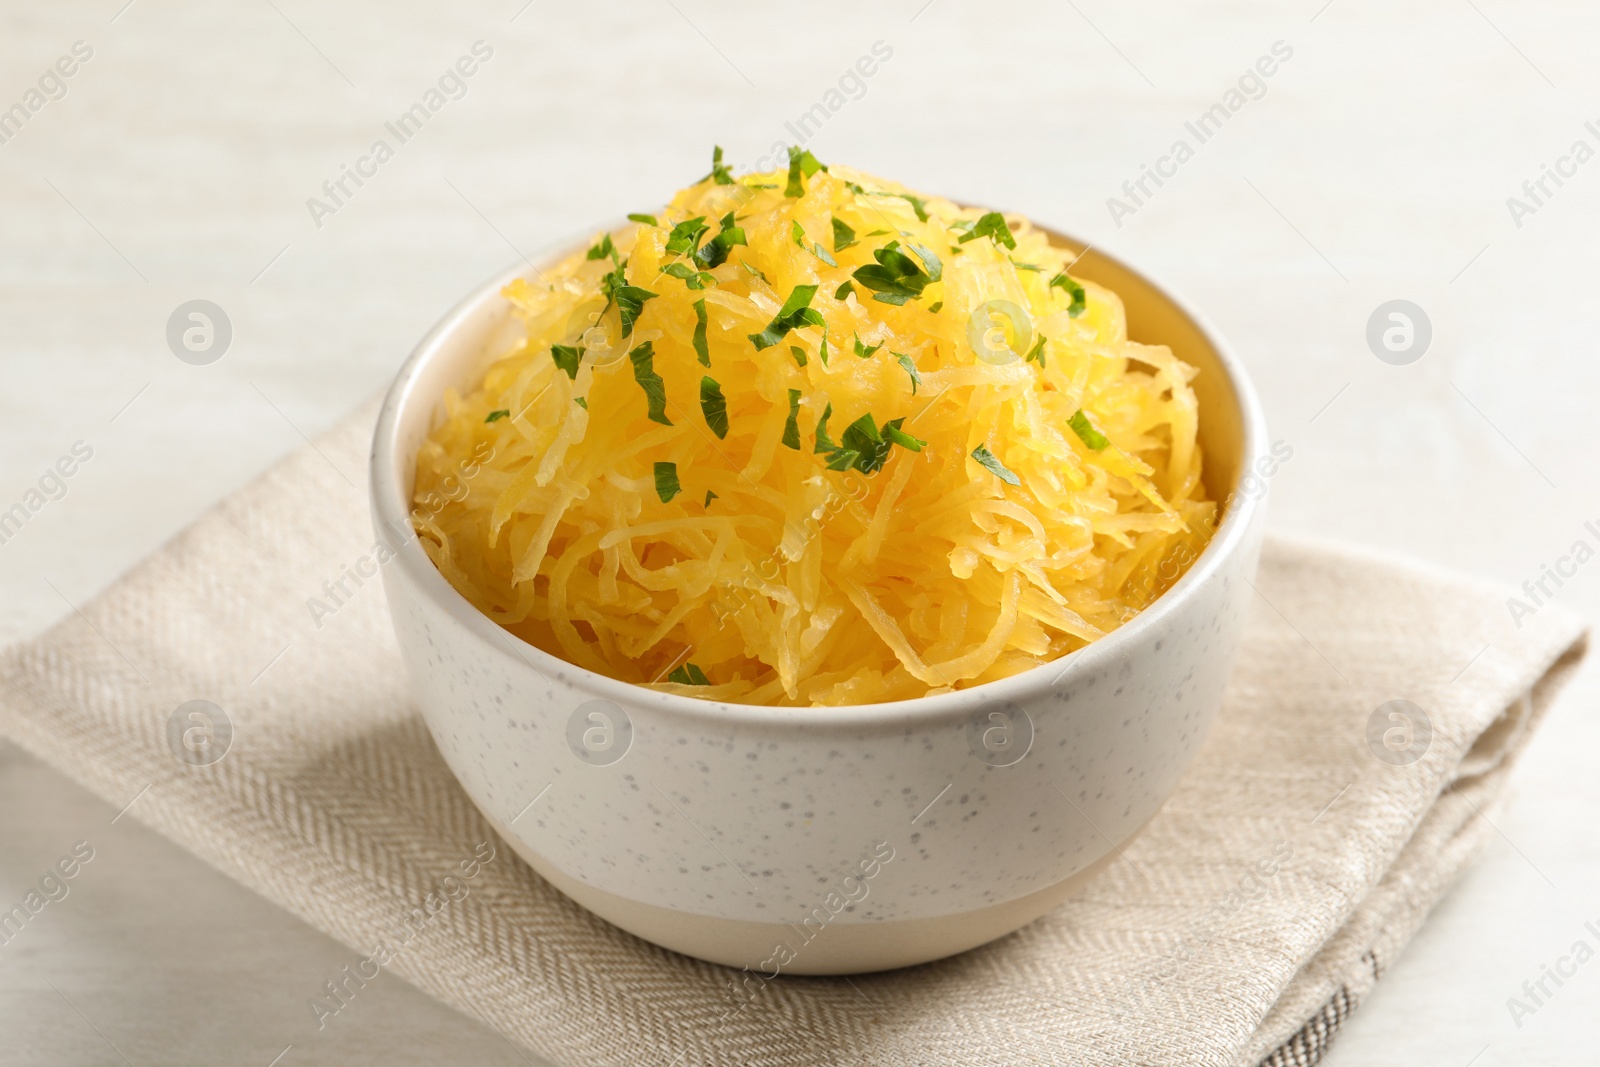 Photo of Bowl with cooked spaghetti squash on white table